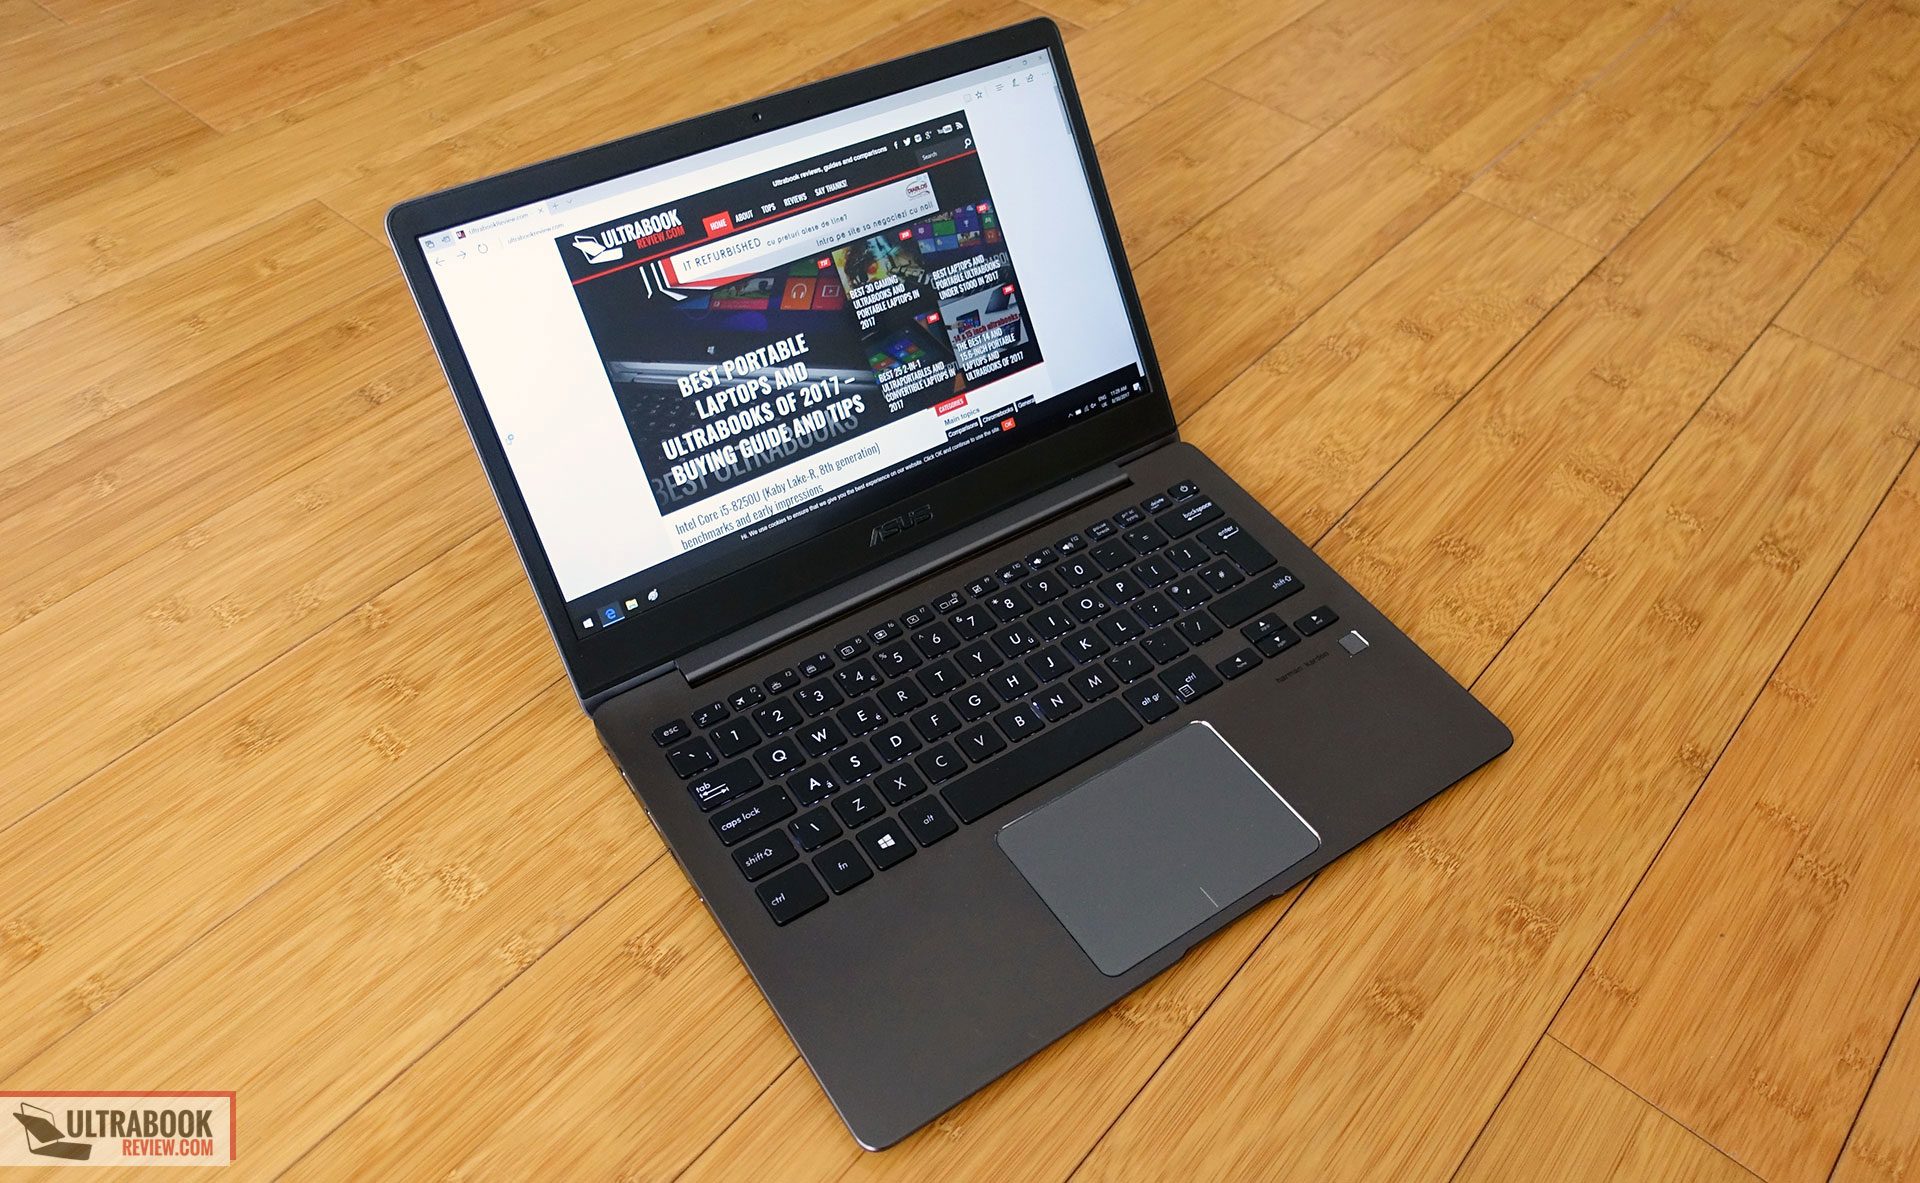 Asus ZenBook 13 UX331UN review: An ultraportable laptop with a knack for  gaming